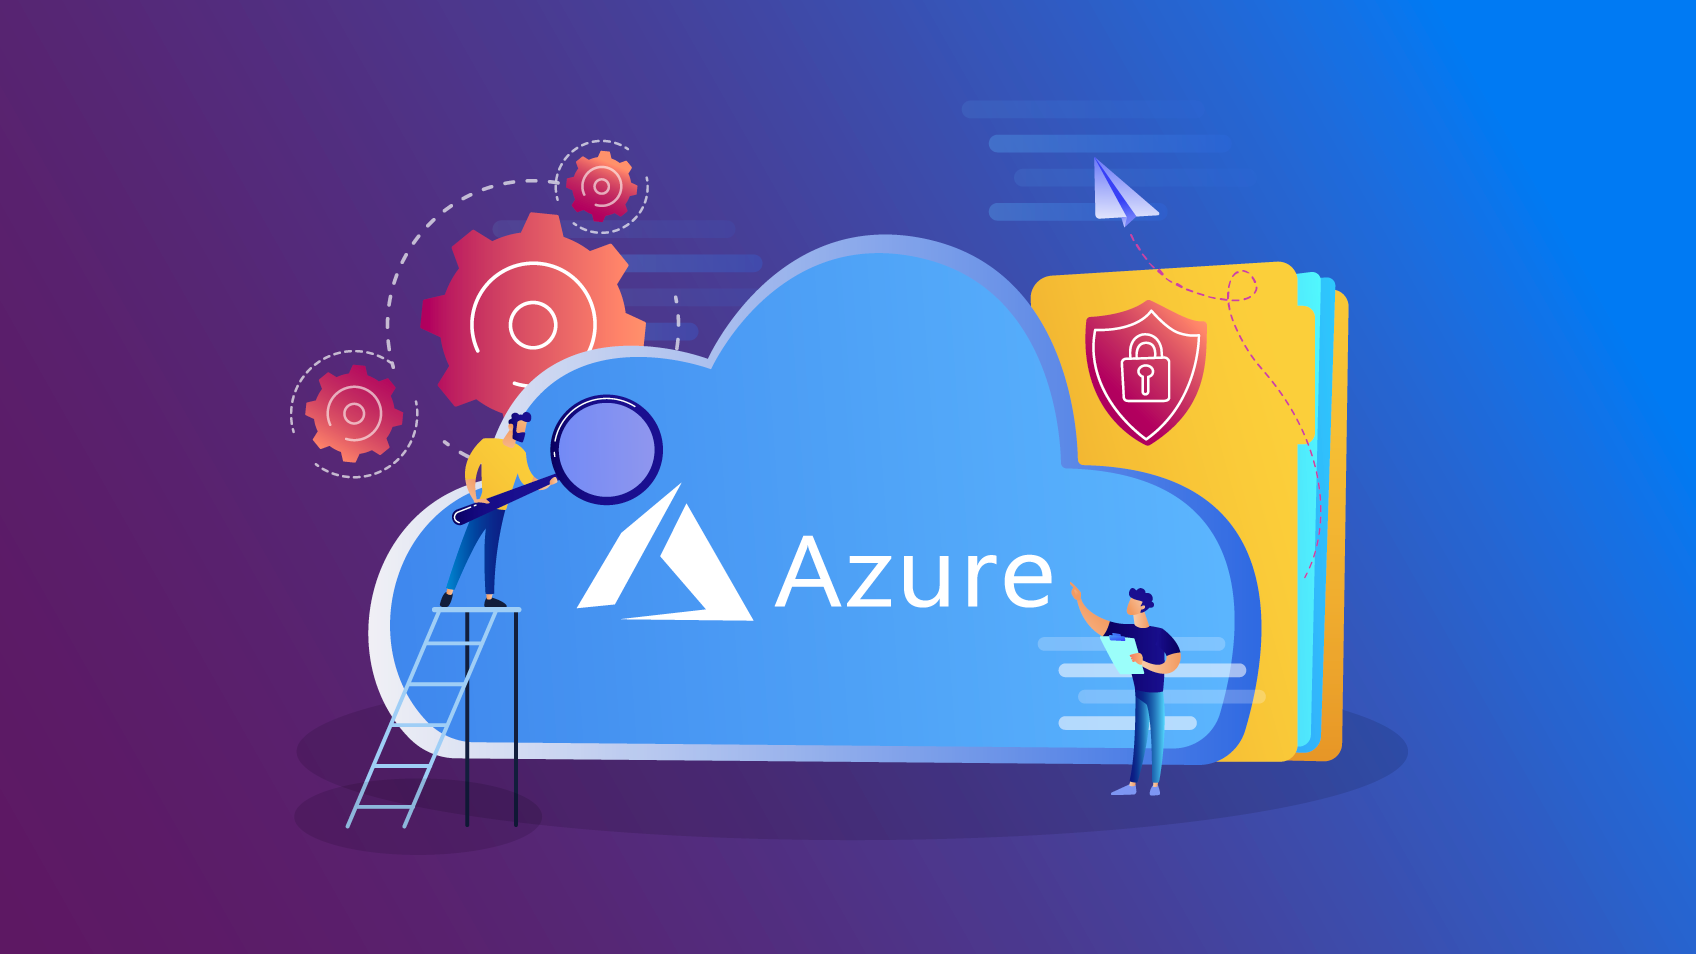 6 ways you can benefit your business with Microsoft Azure